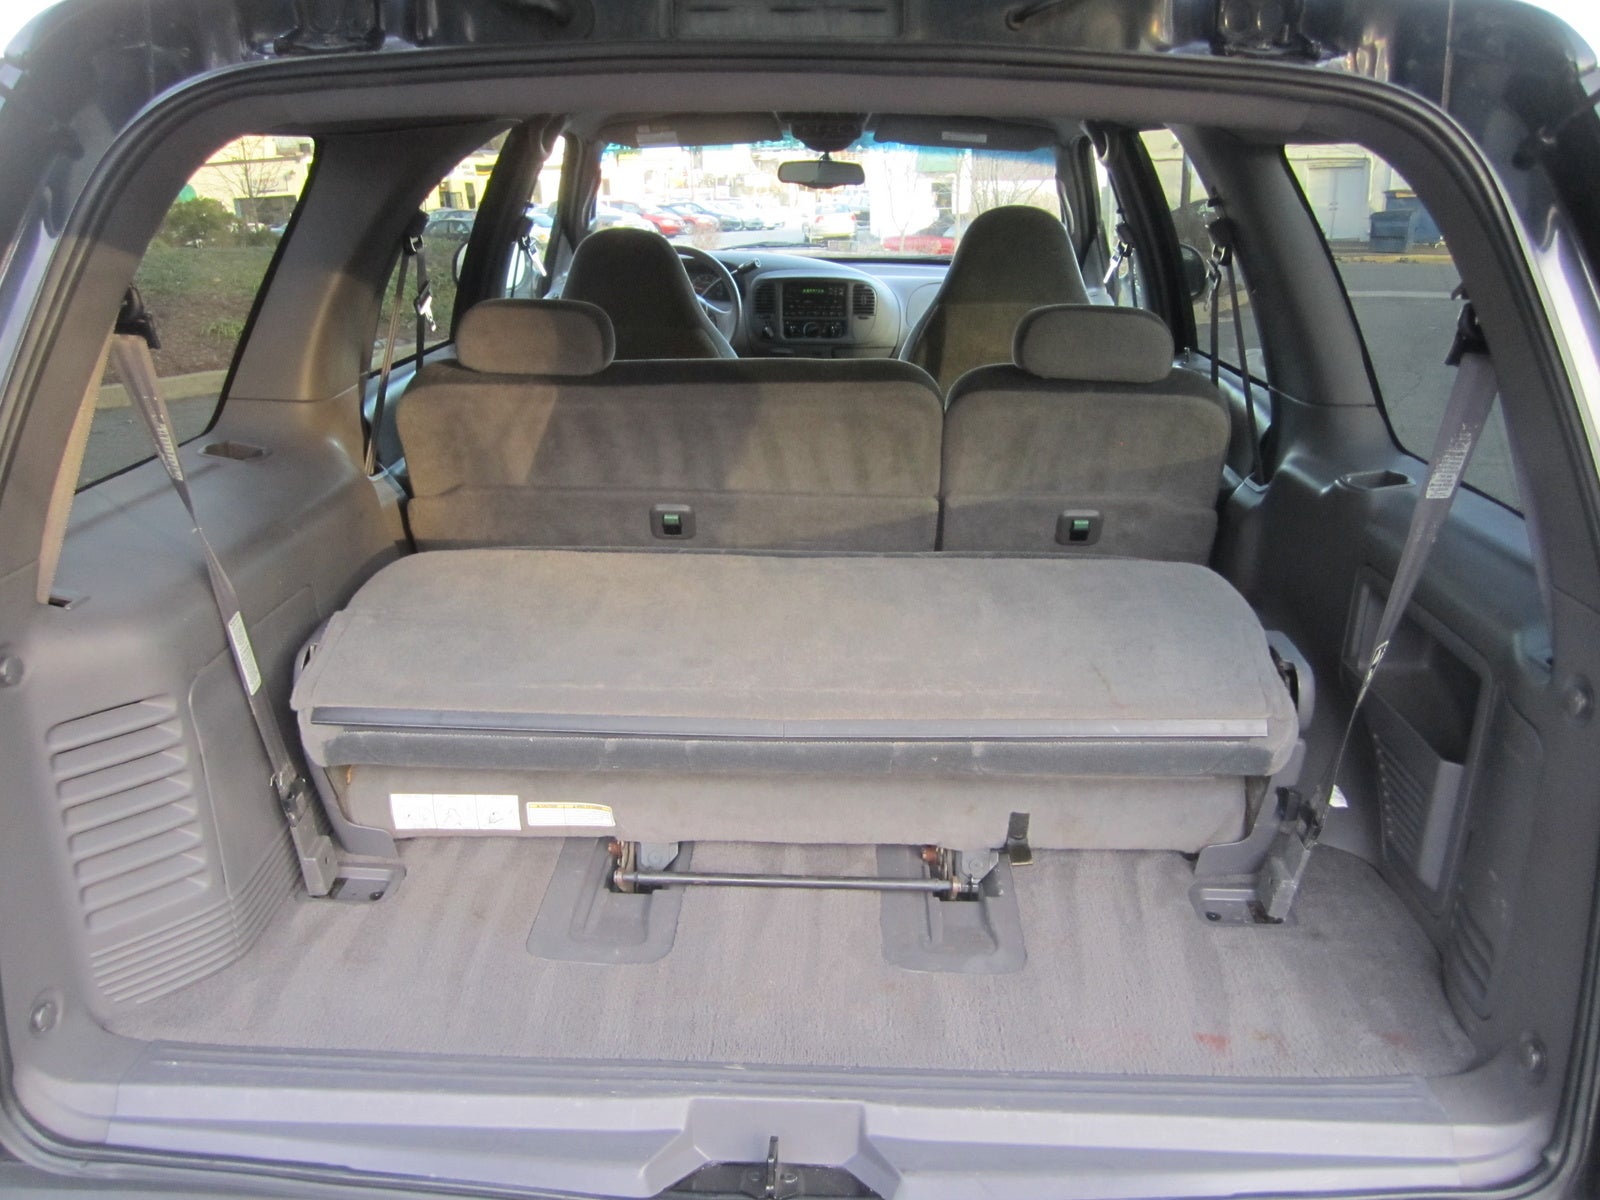 2000 Ford expedition xlt interior #7